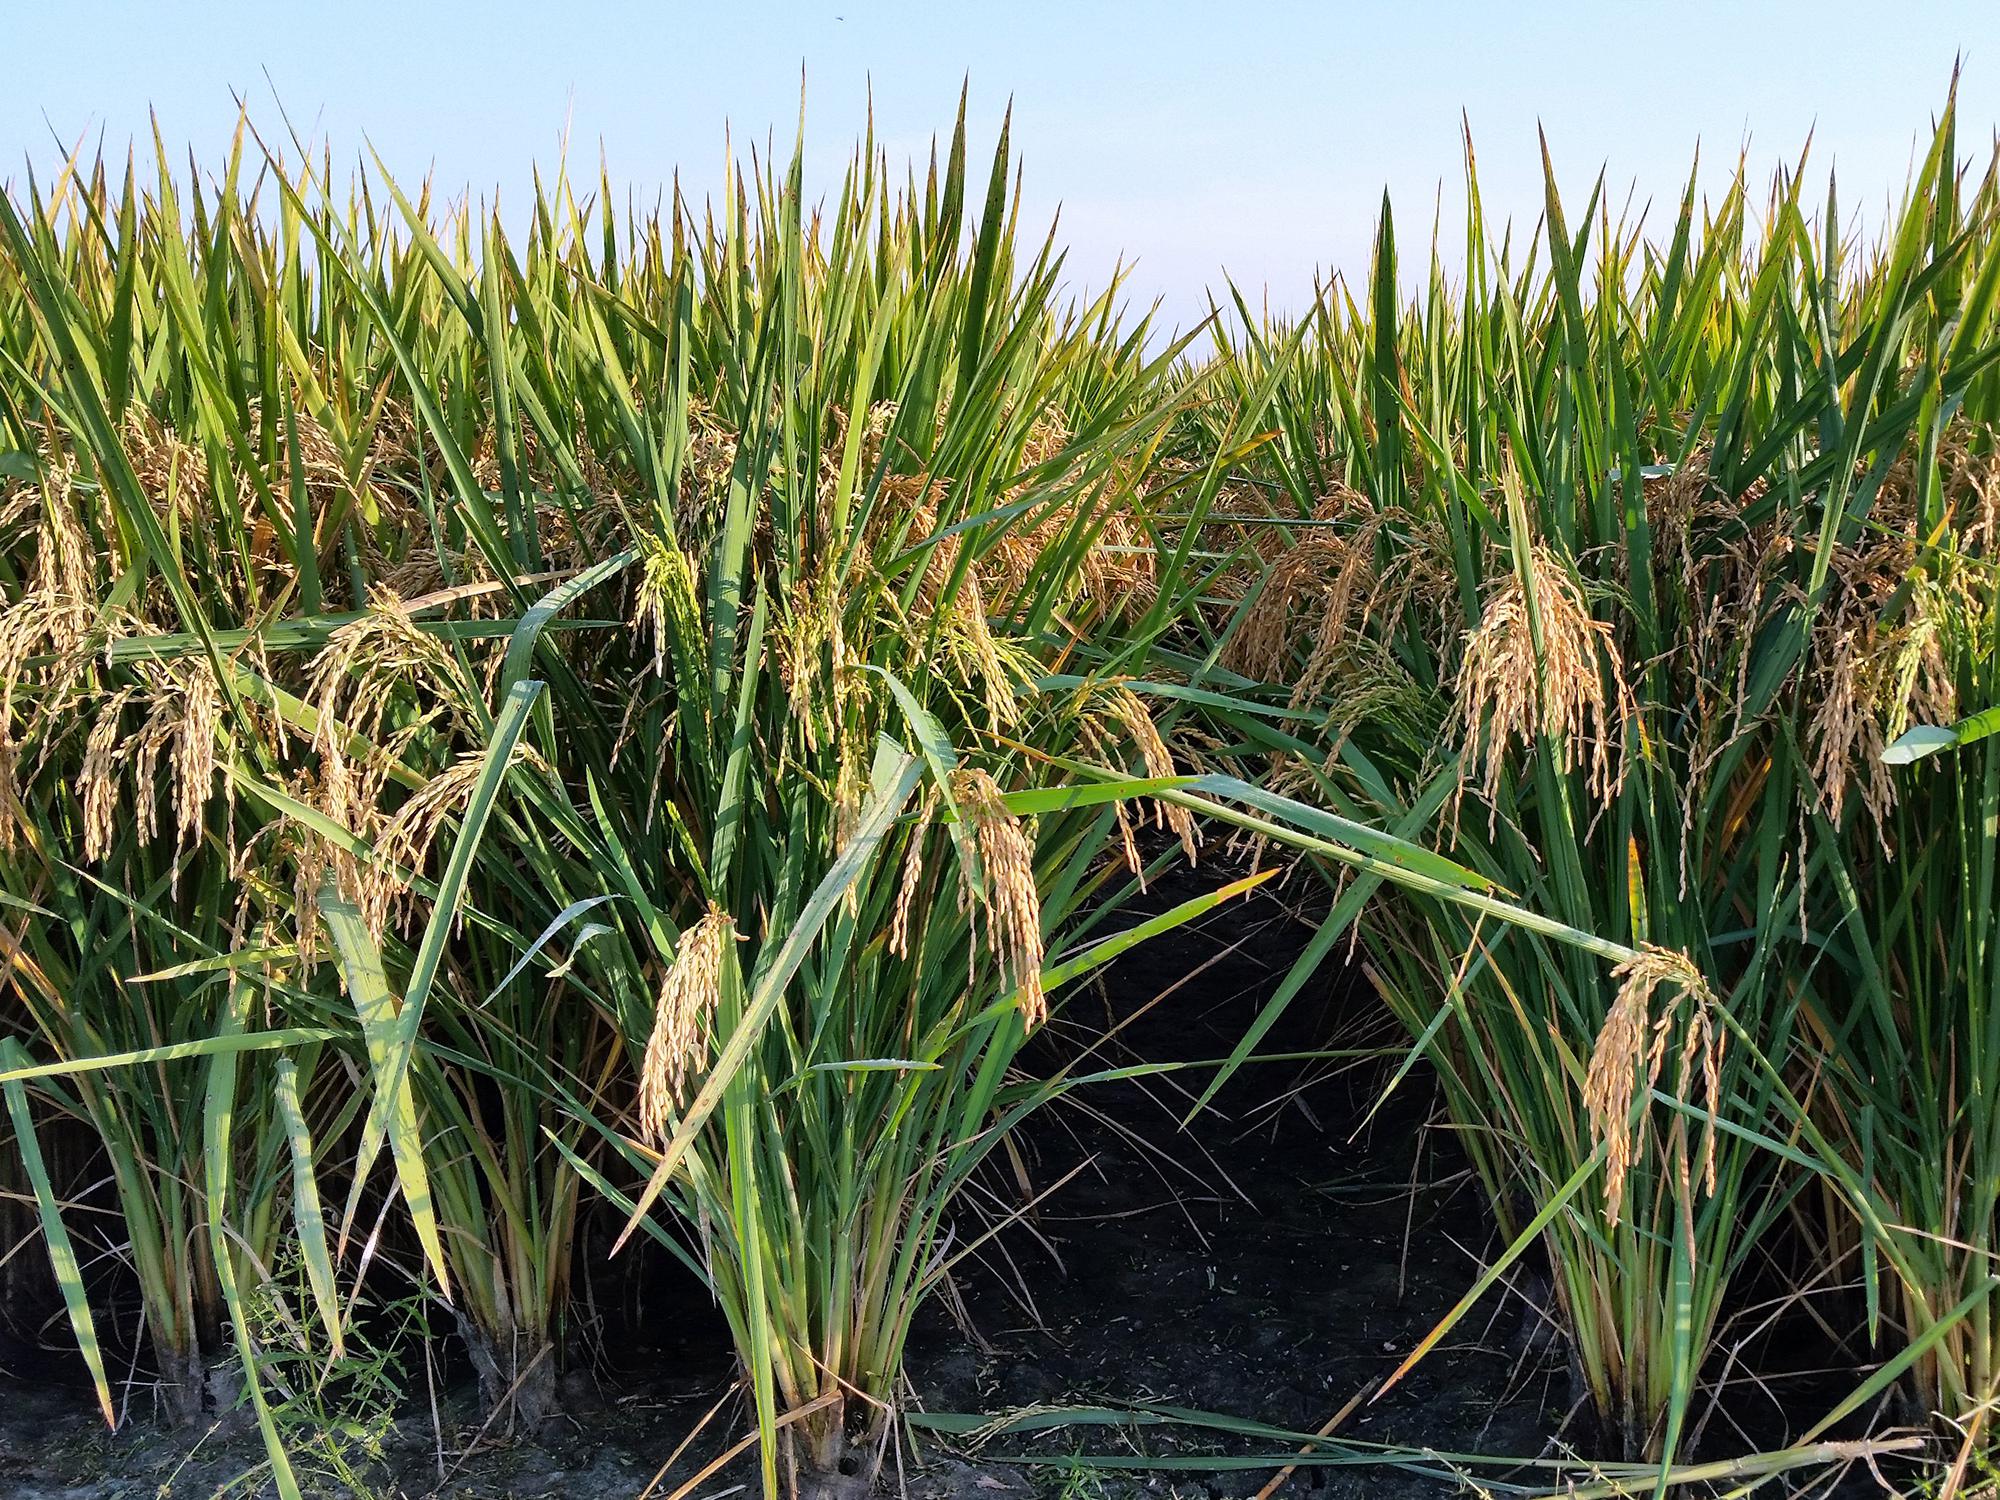 A Thad rice paddy is pictured at the Delta Research and Extension Center in Stoneville, Mississippi, on September 17, 2014. (Photo by MSU Delta Research and Extension Center/Ed Redoña)